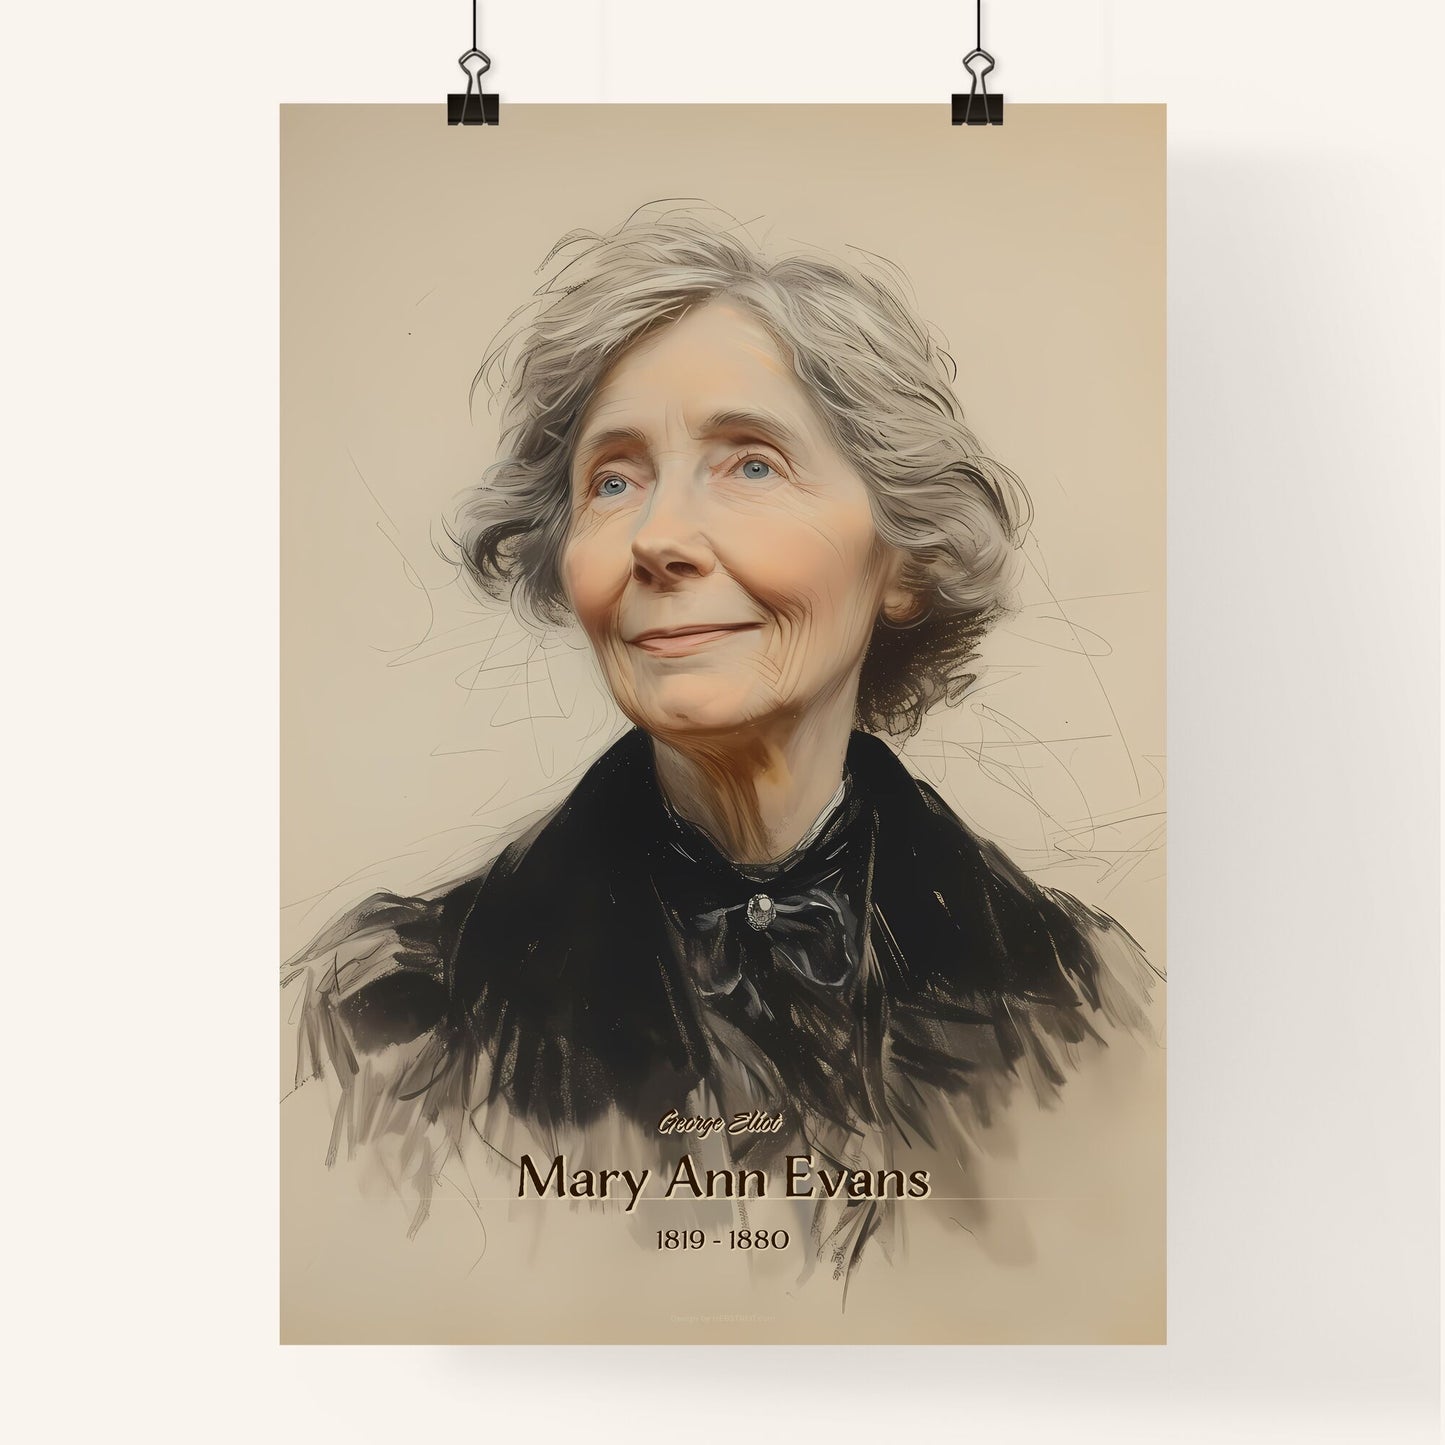 George Eliot, Mary Ann Evans, 1819 - 1880, A Poster of a woman with grey hair Default Title